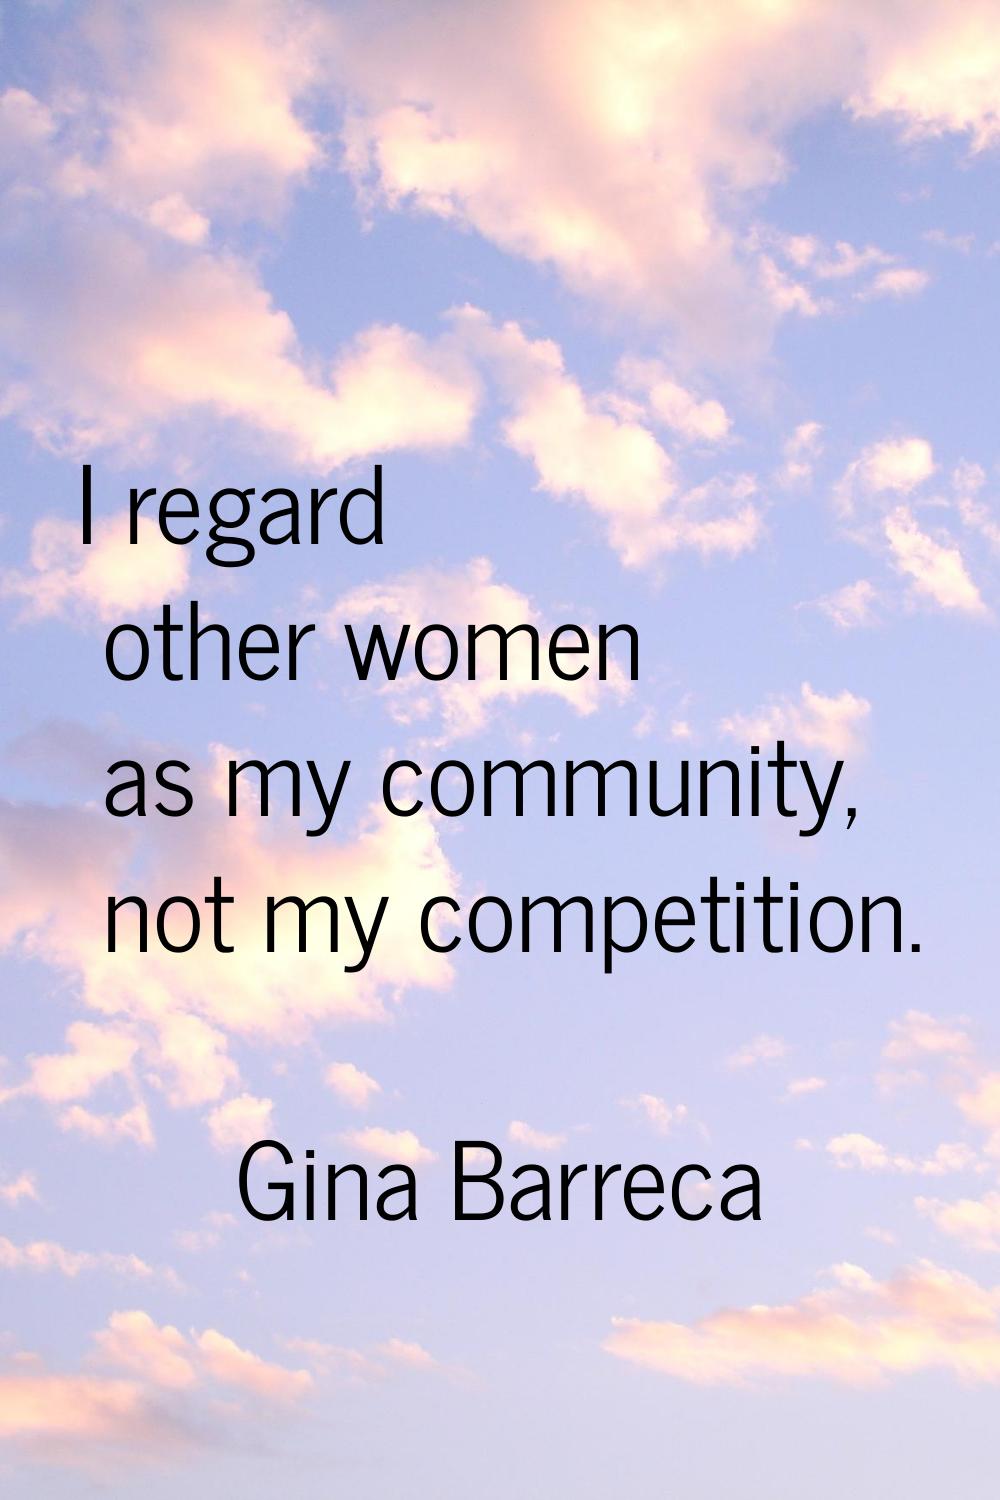 I regard other women as my community, not my competition.